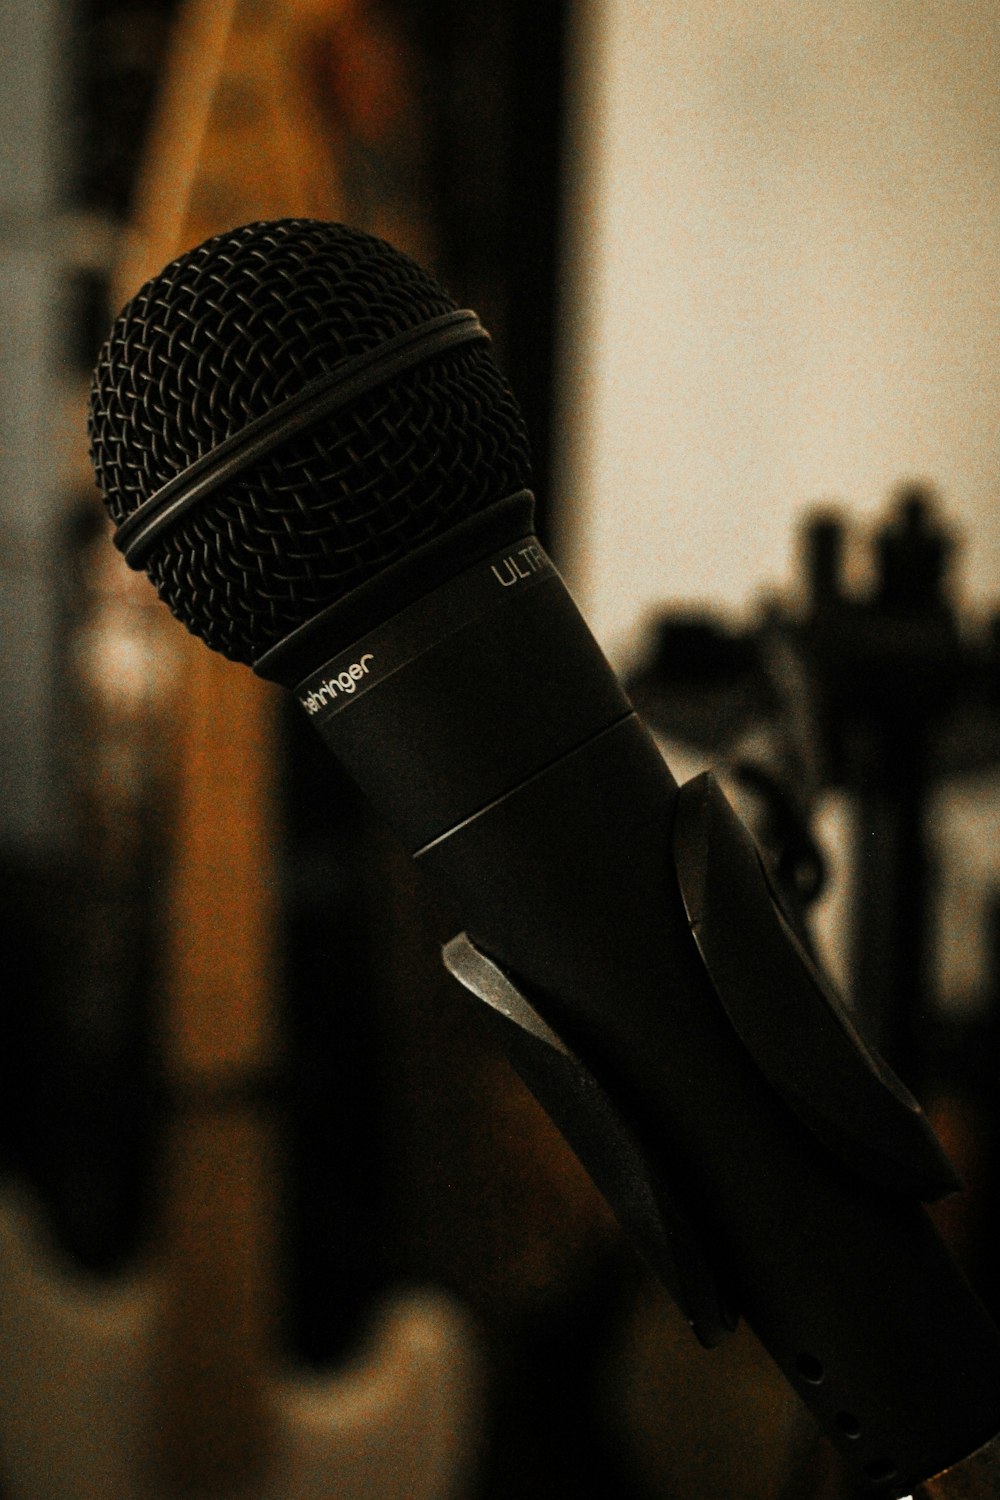 a microphone is shown in front of a blurry background